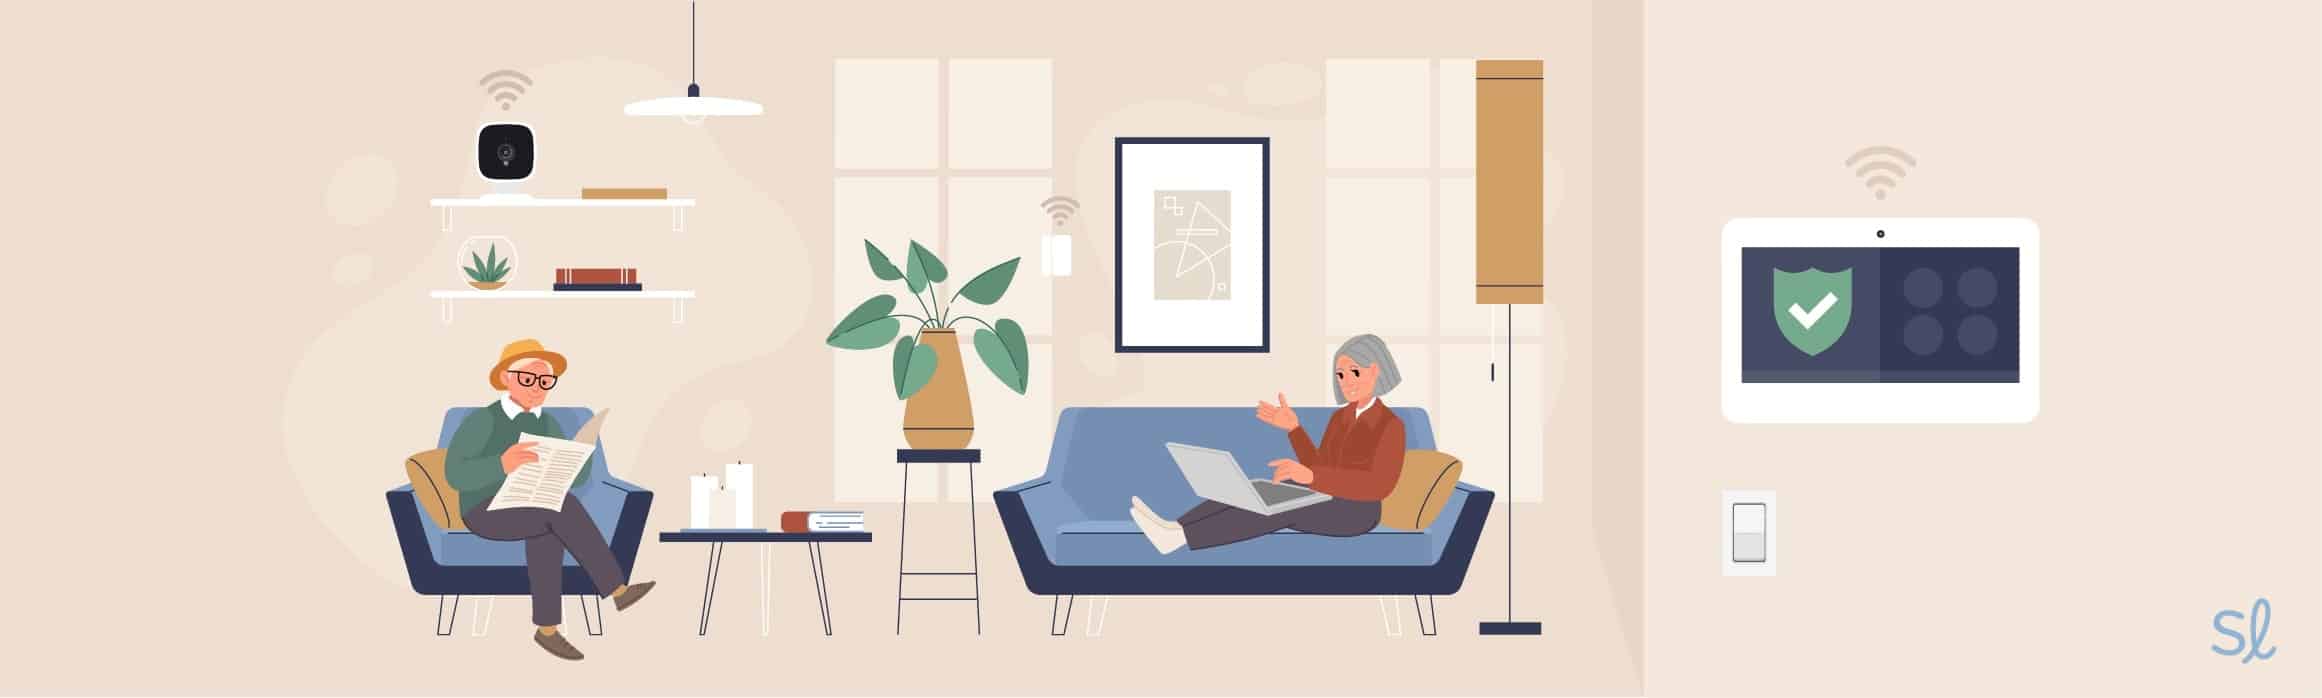 10 Devices for Keeping Seniors Safe at Home